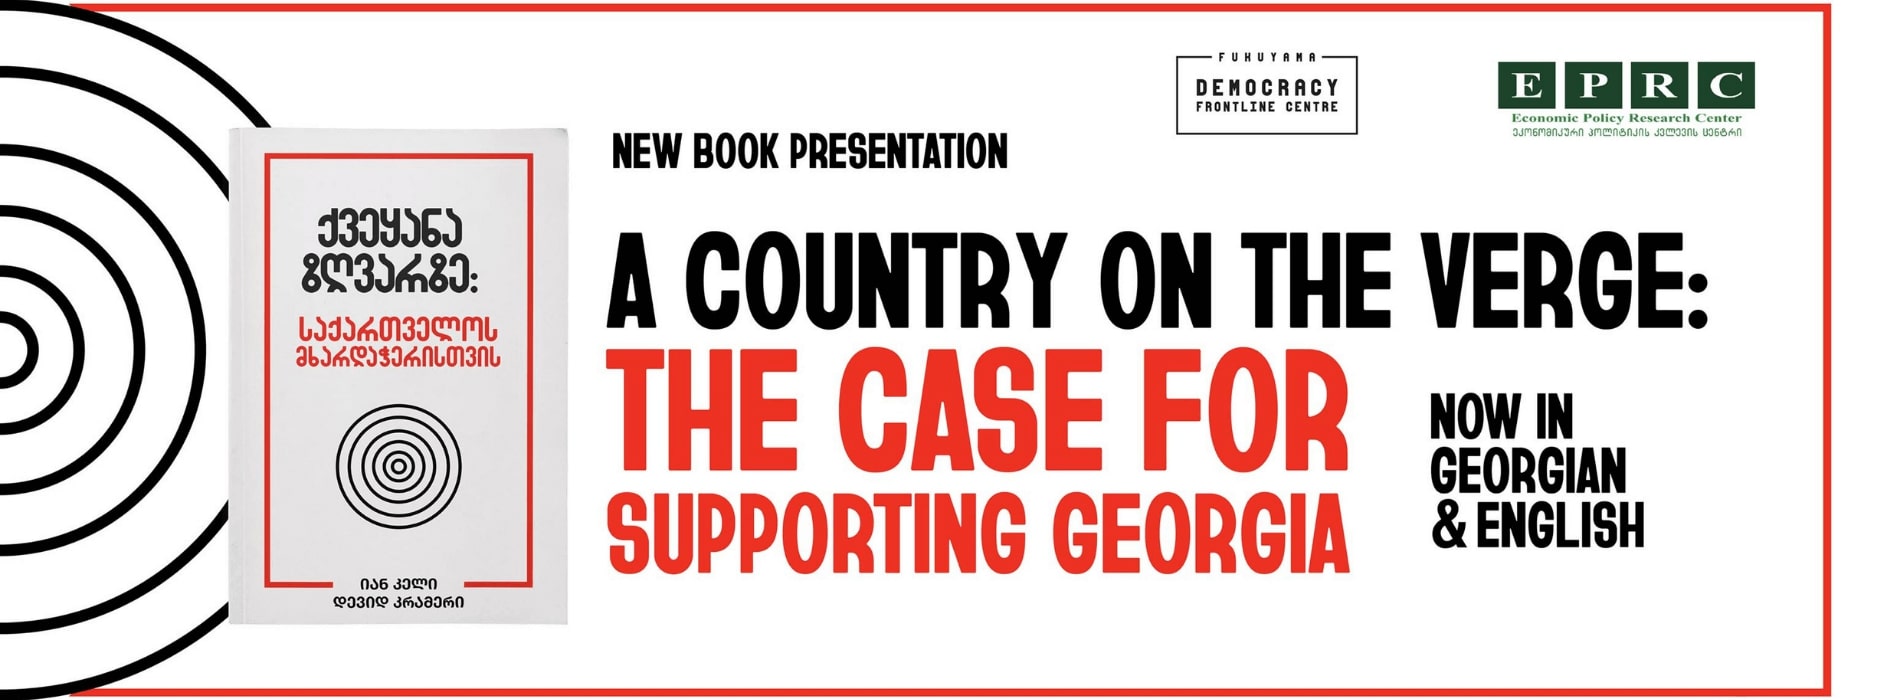 A Country on the Verge: The Case for Supporting Georgia